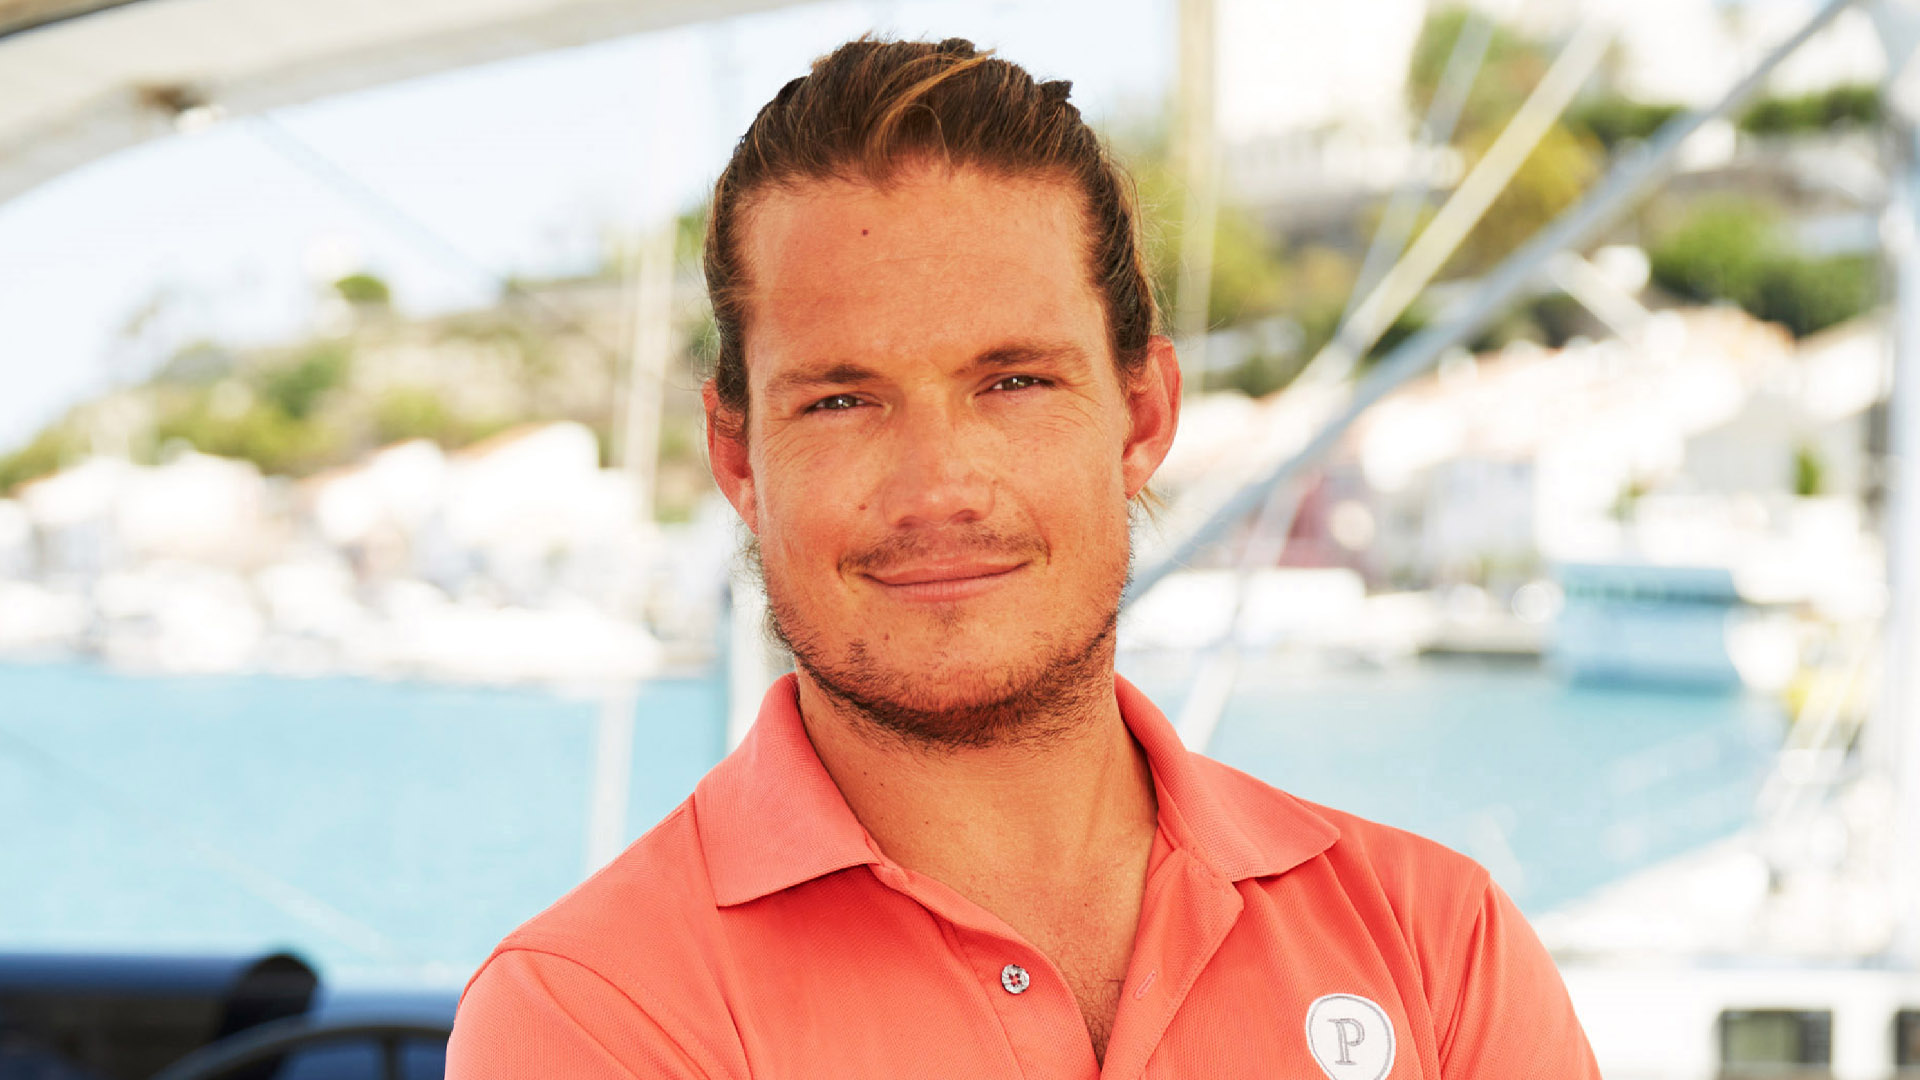 Why Gary From Below Deck Sailing Yacht Deserves More Love in Season 4